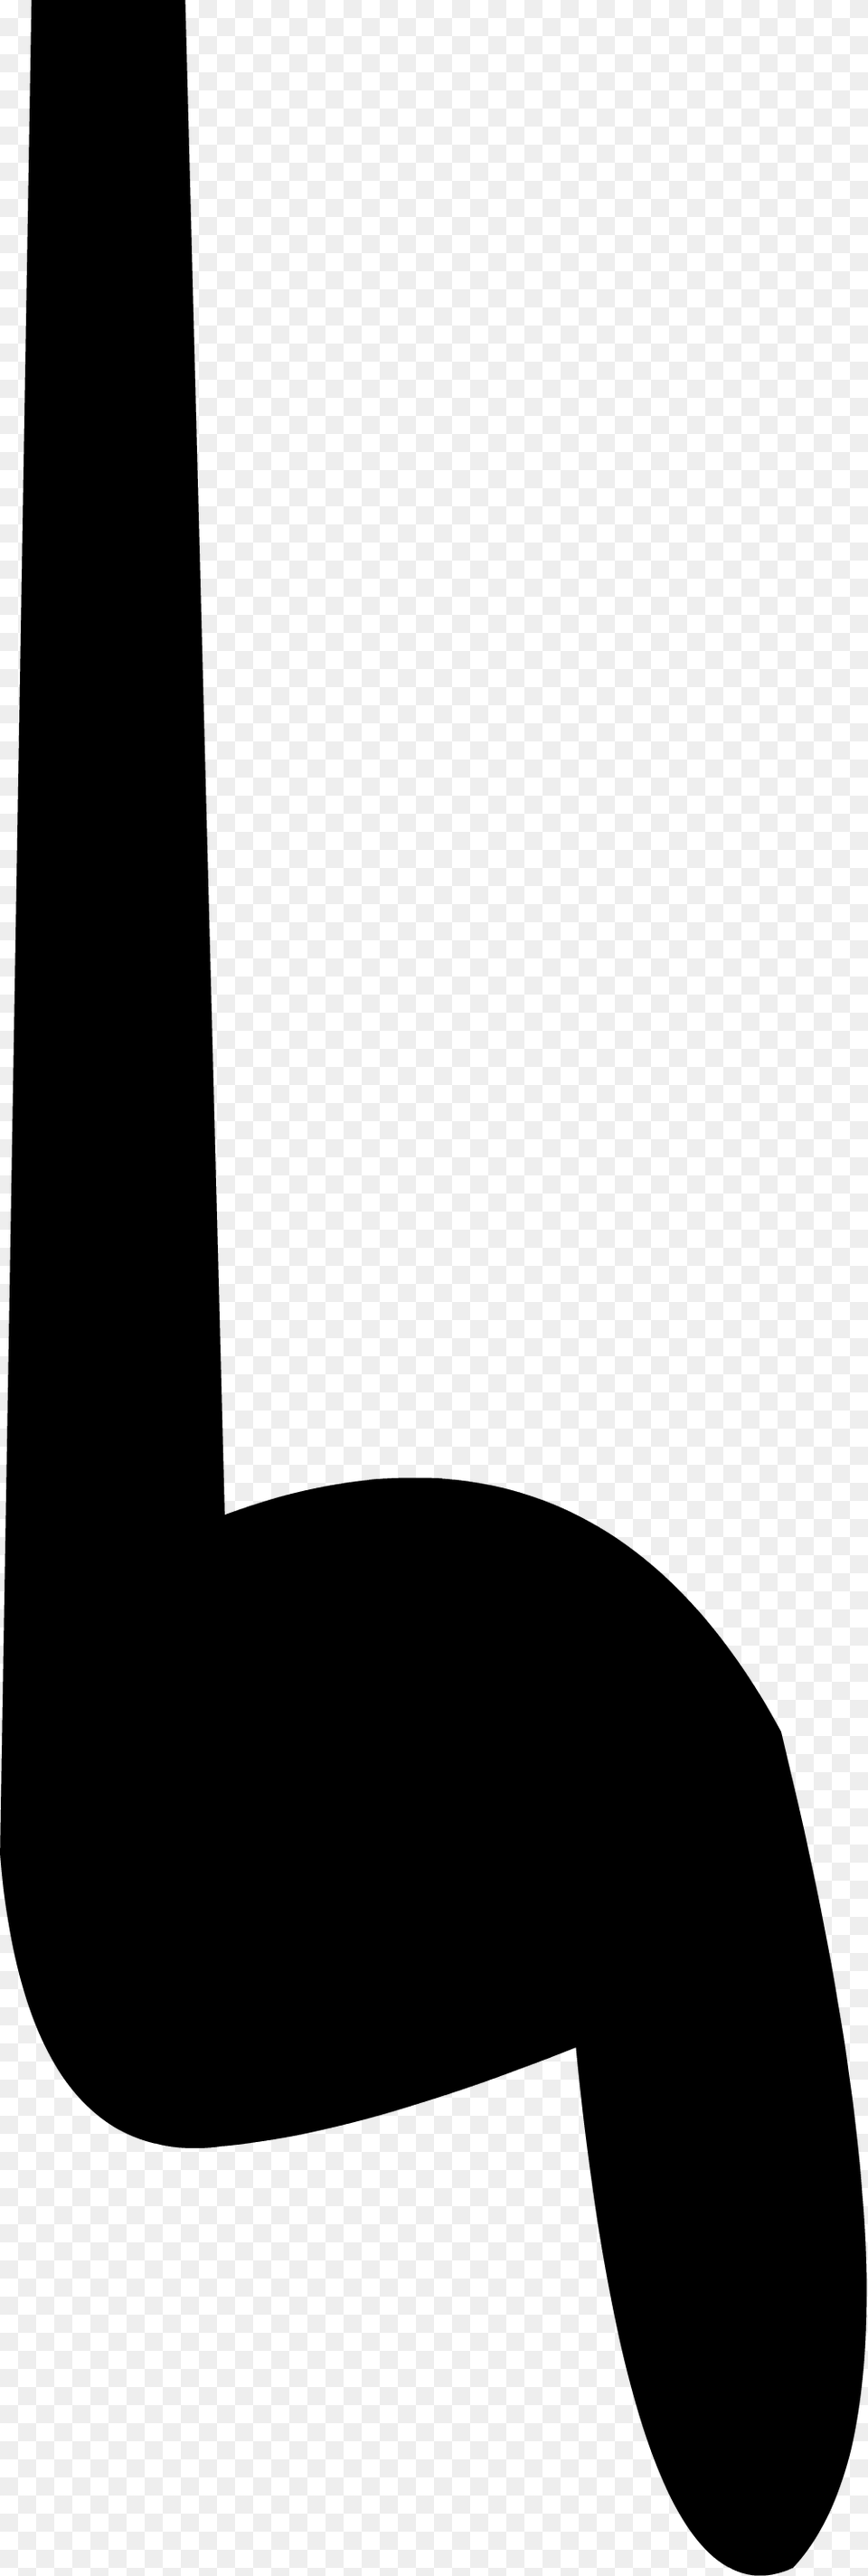 Ugly Point Finger Arm Bfdi Pointing Arm, Gray Free Png Download